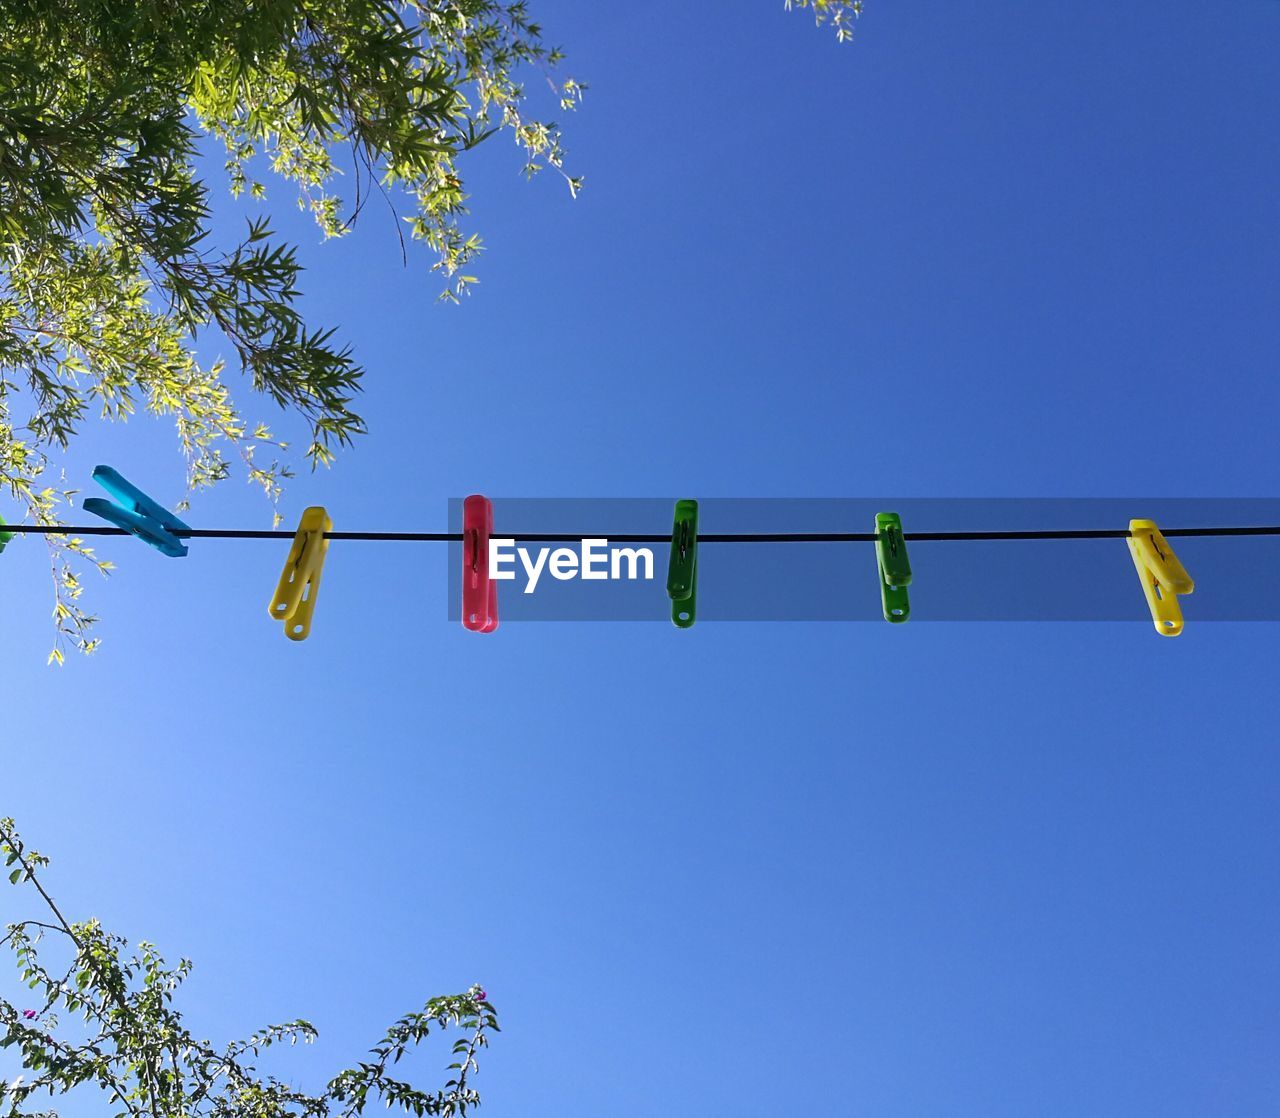 LOW ANGLE VIEW OF MULTI COLORED HANGING AGAINST CLEAR BLUE SKY